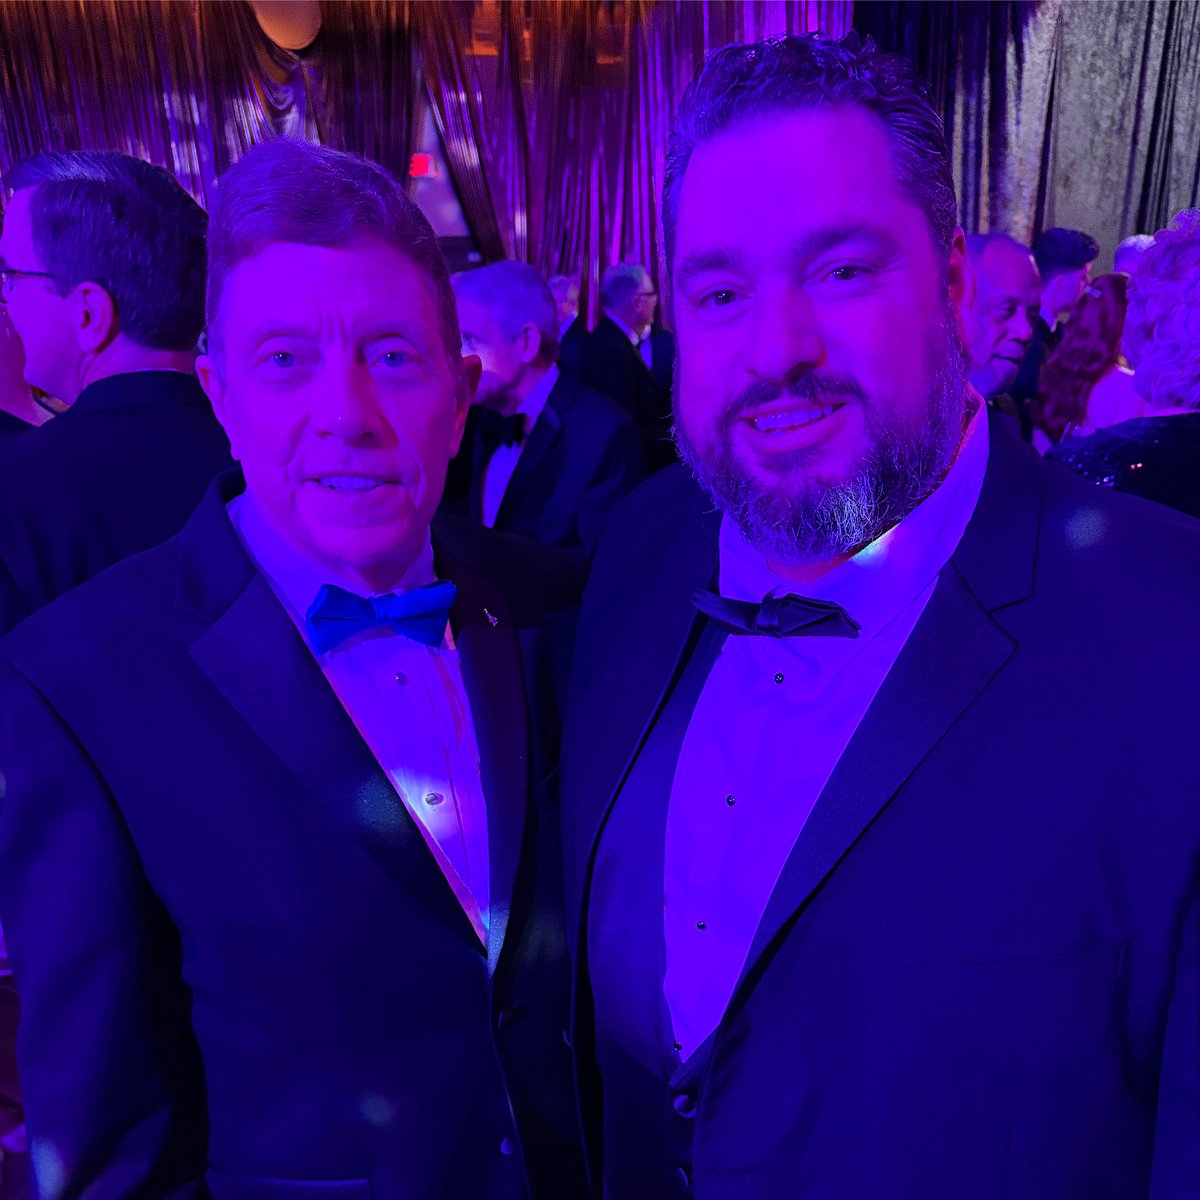 Had the extreme honor of meeting astronaut Mike Fossum this weekend. Mr. Fossum served as Commander aboard the International Space Station, spent 194 days in space, and has been on seven space walks! #thetexasbucketlist #NASA #astronaught